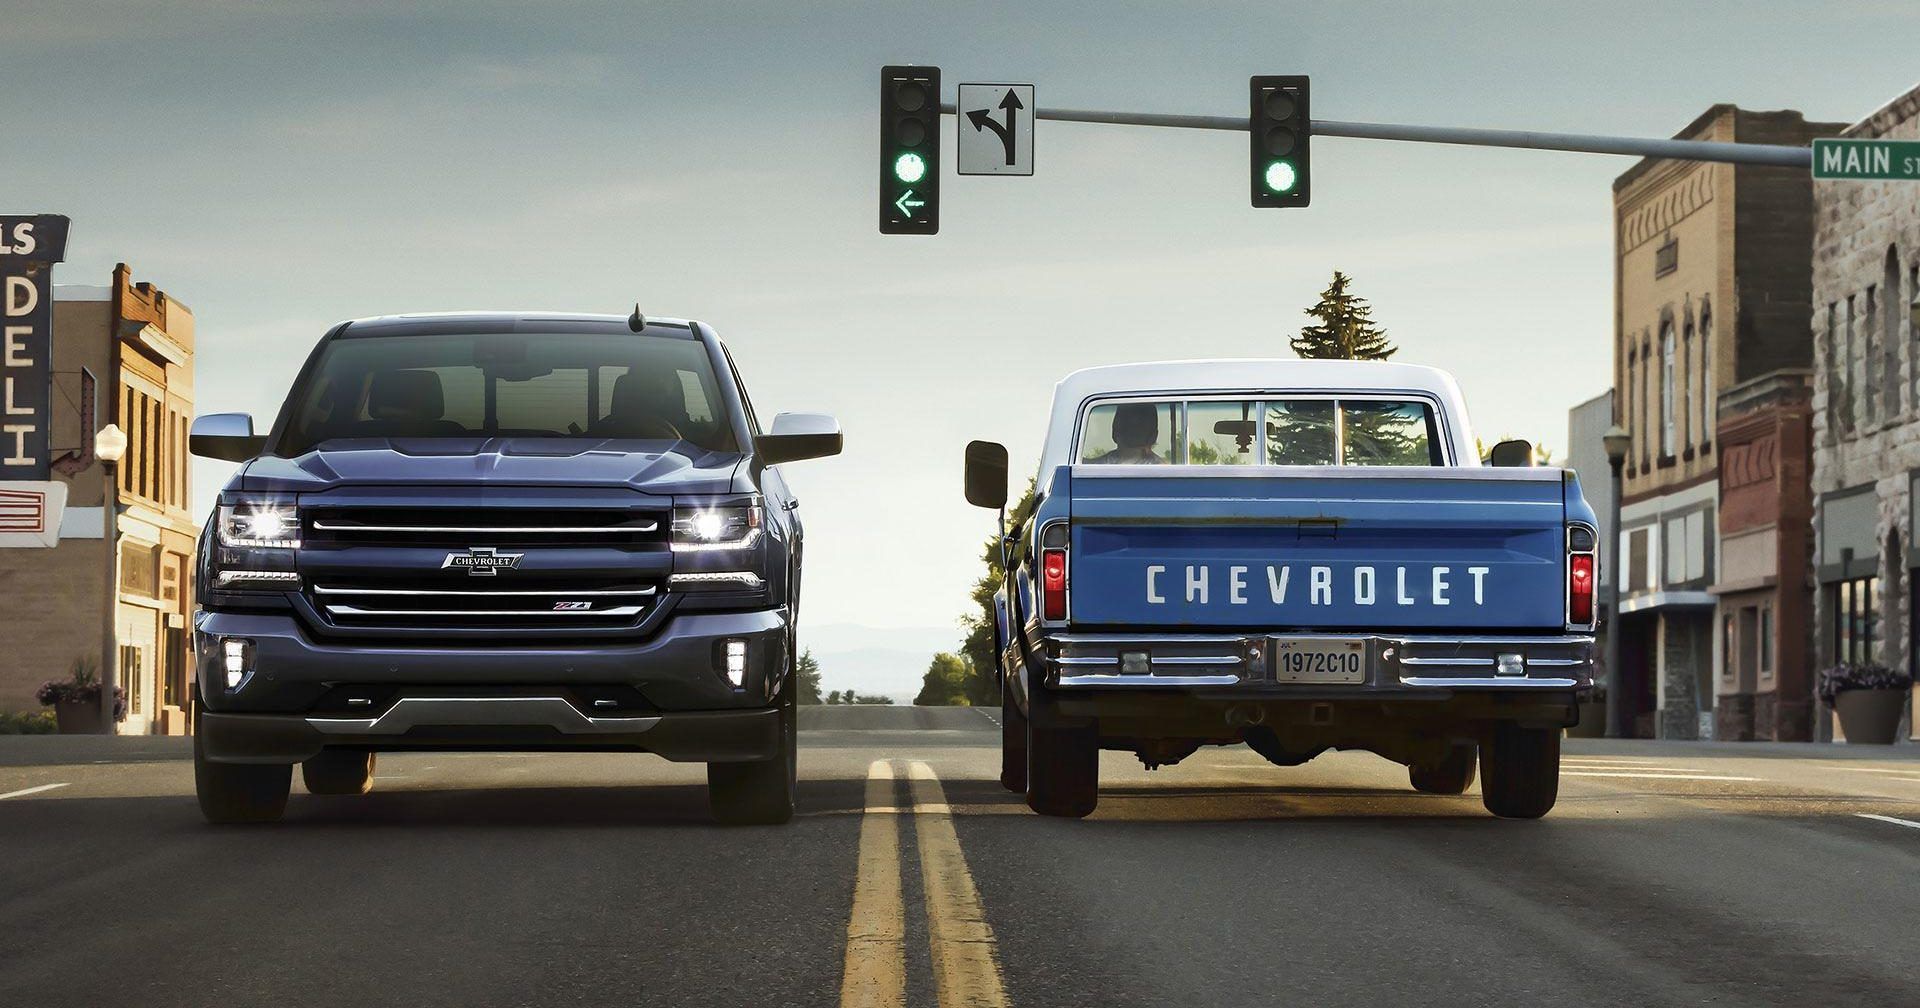 The Real Story Behind The Chevy Silverado's Evolution